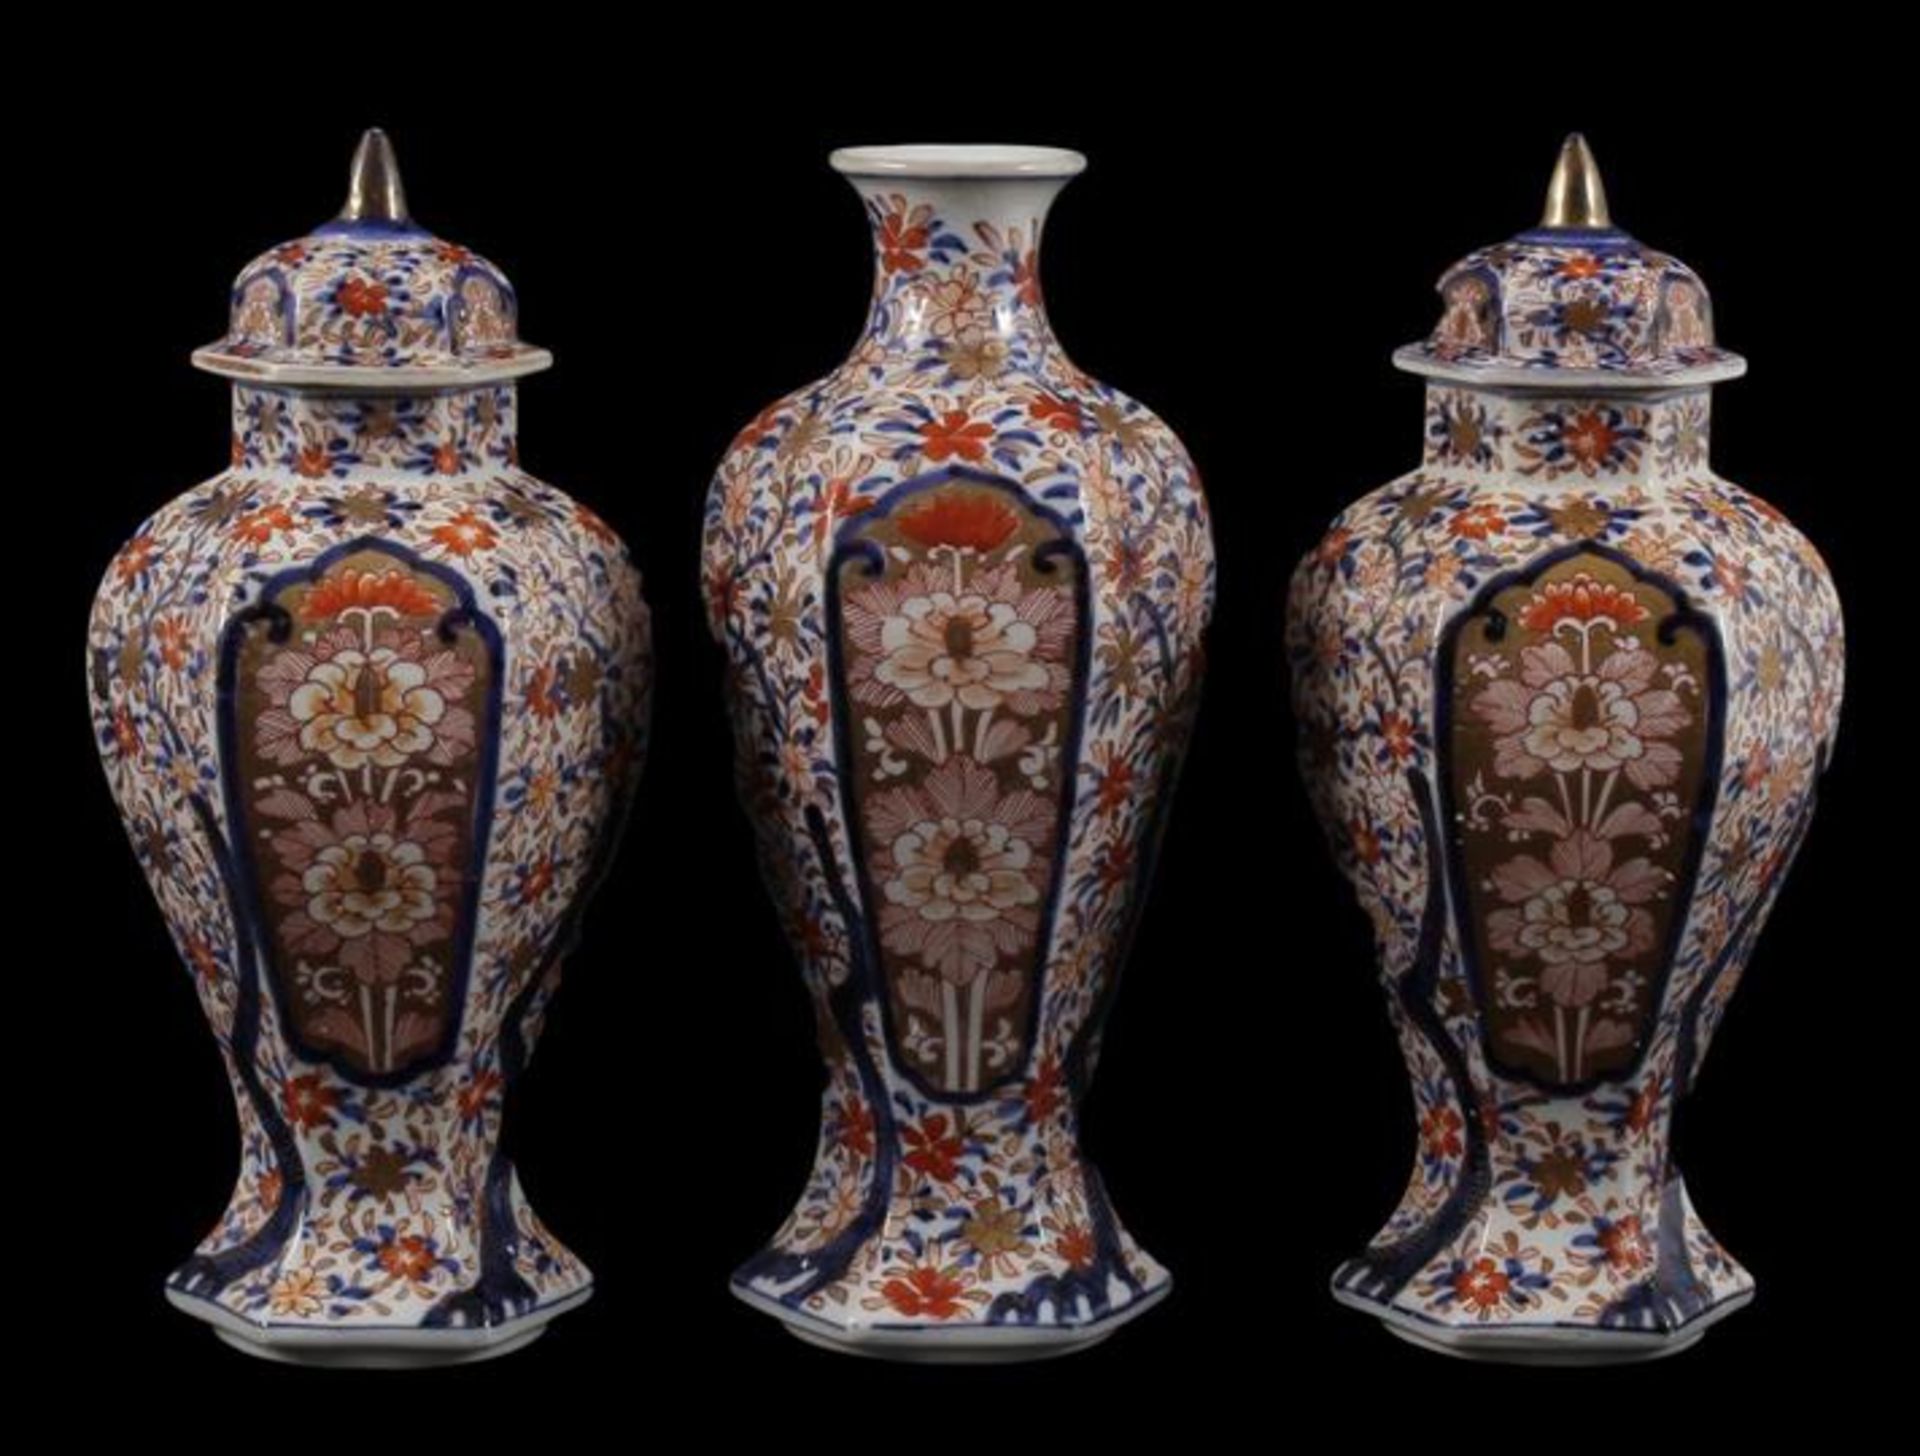 Imari 3-part porcelain cabinet set, 19th century, 25 cm high (1 lid with damage to the point)